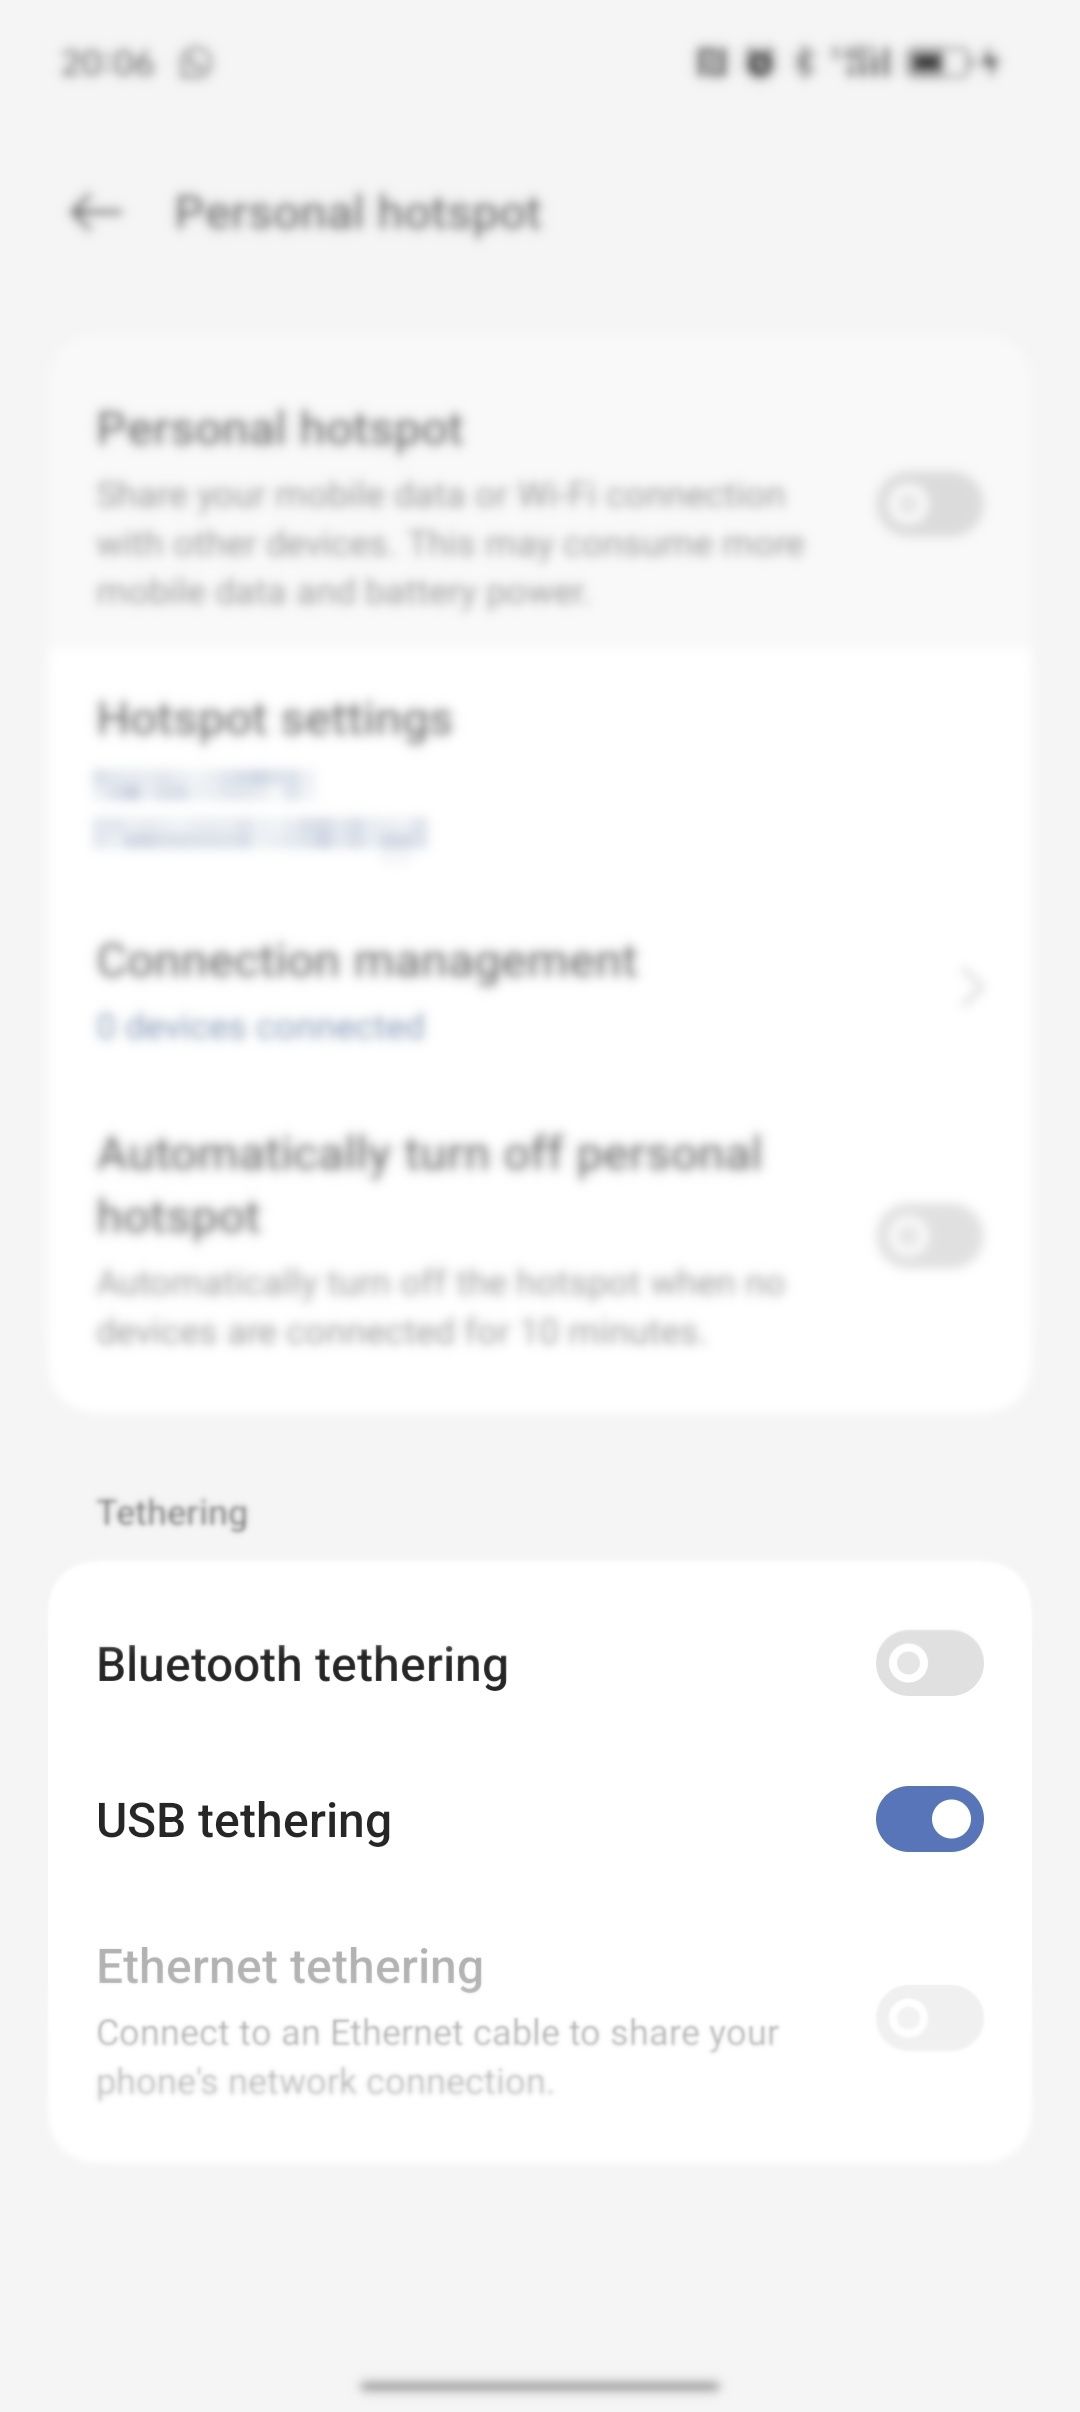 Enable Bluetooth tethering